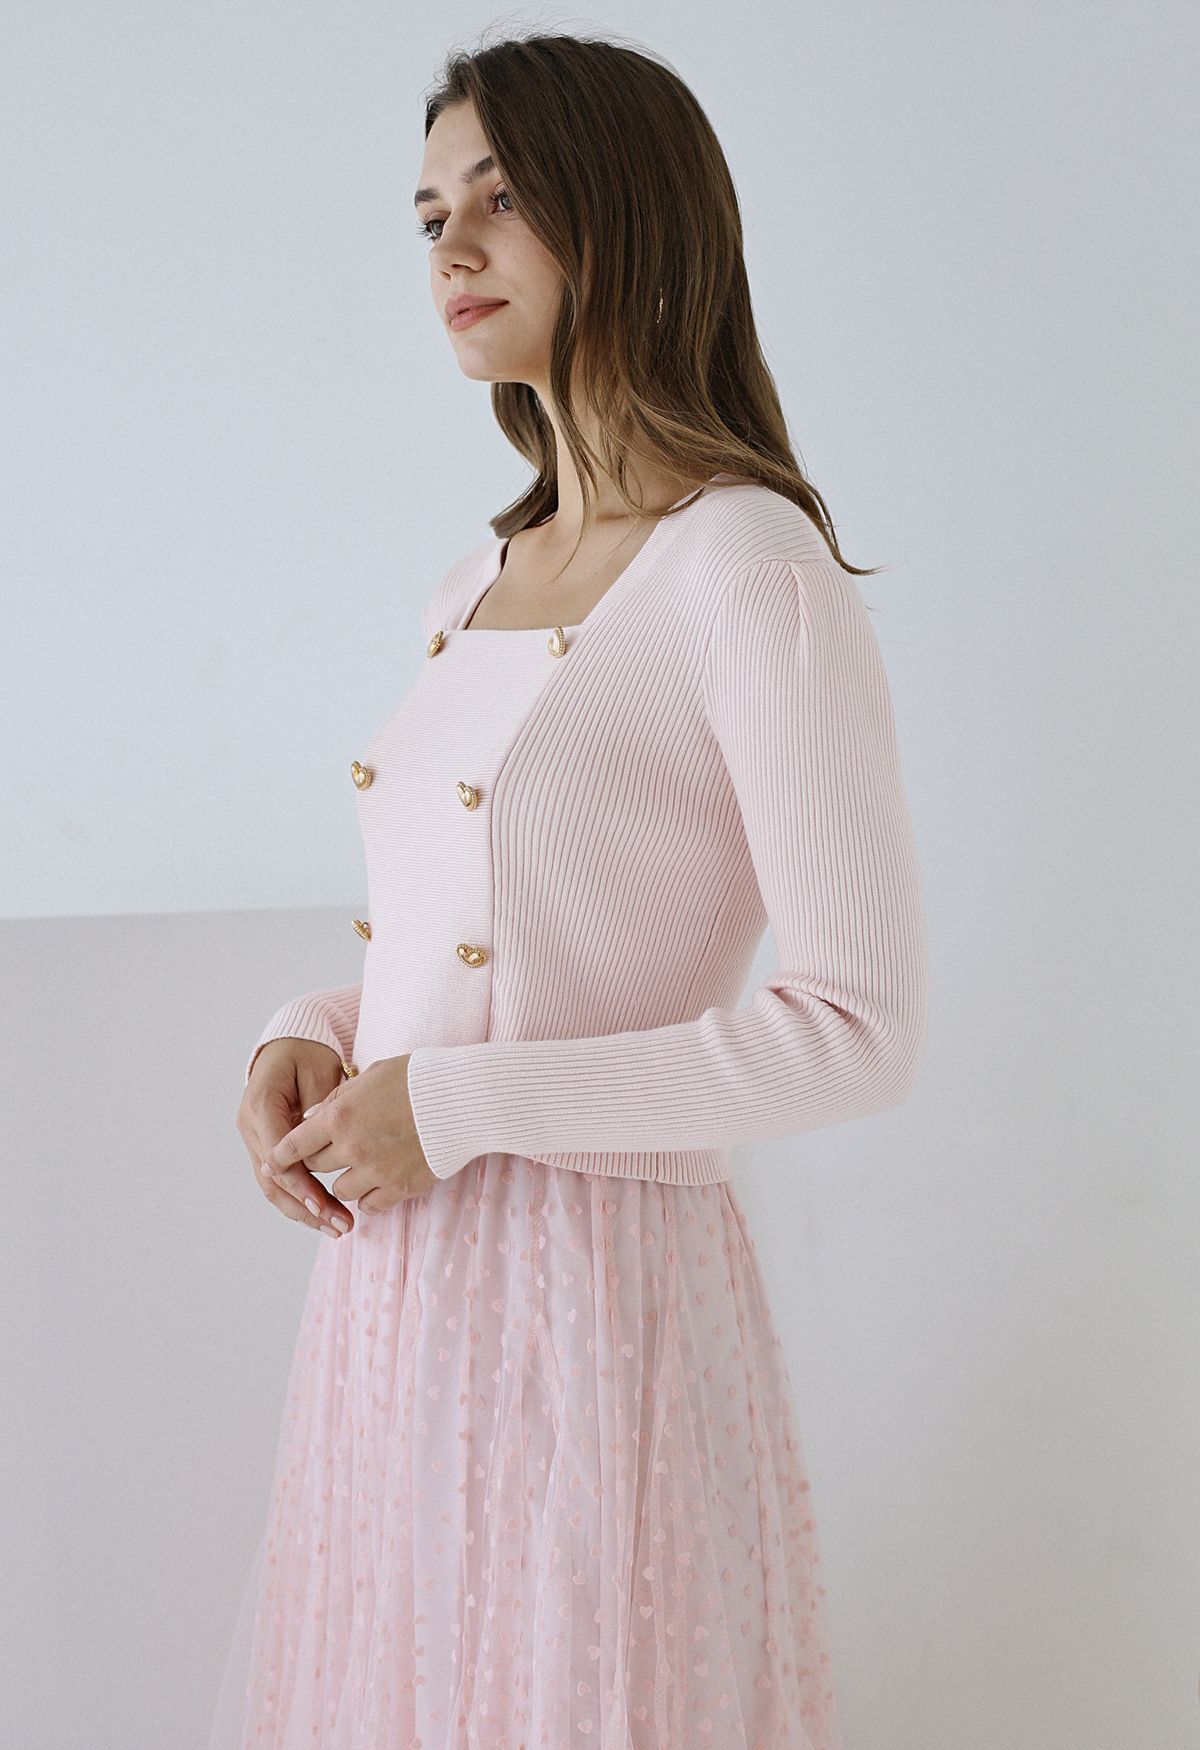 Heart-Shape Buttons Square Neck Knit Top in Light Pink | Chicwish